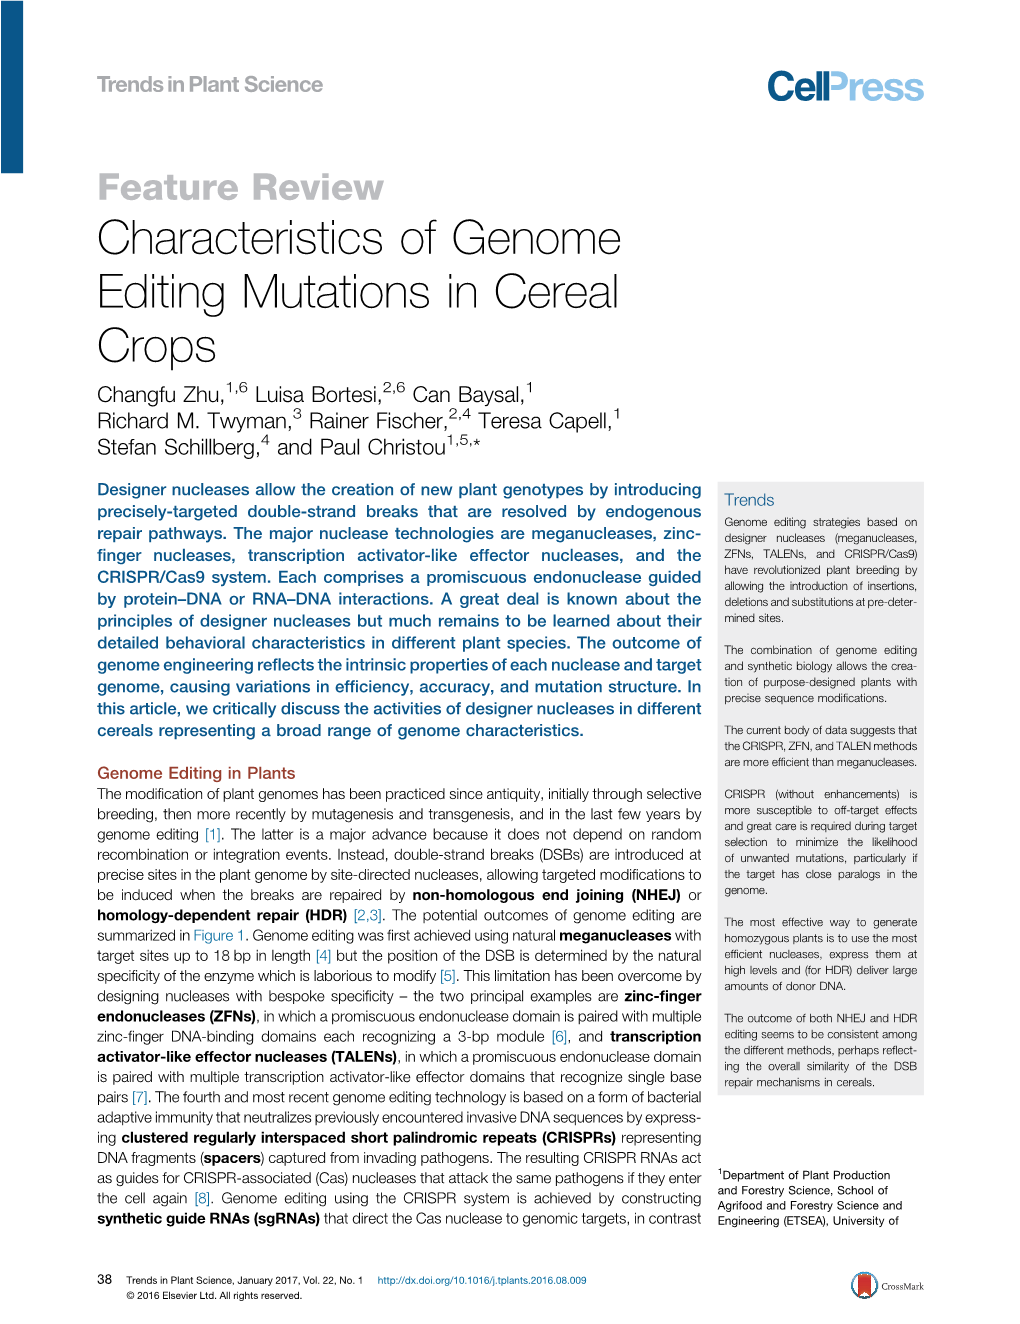 Characteristics of Genome Editing Mutations in Cereal Crops